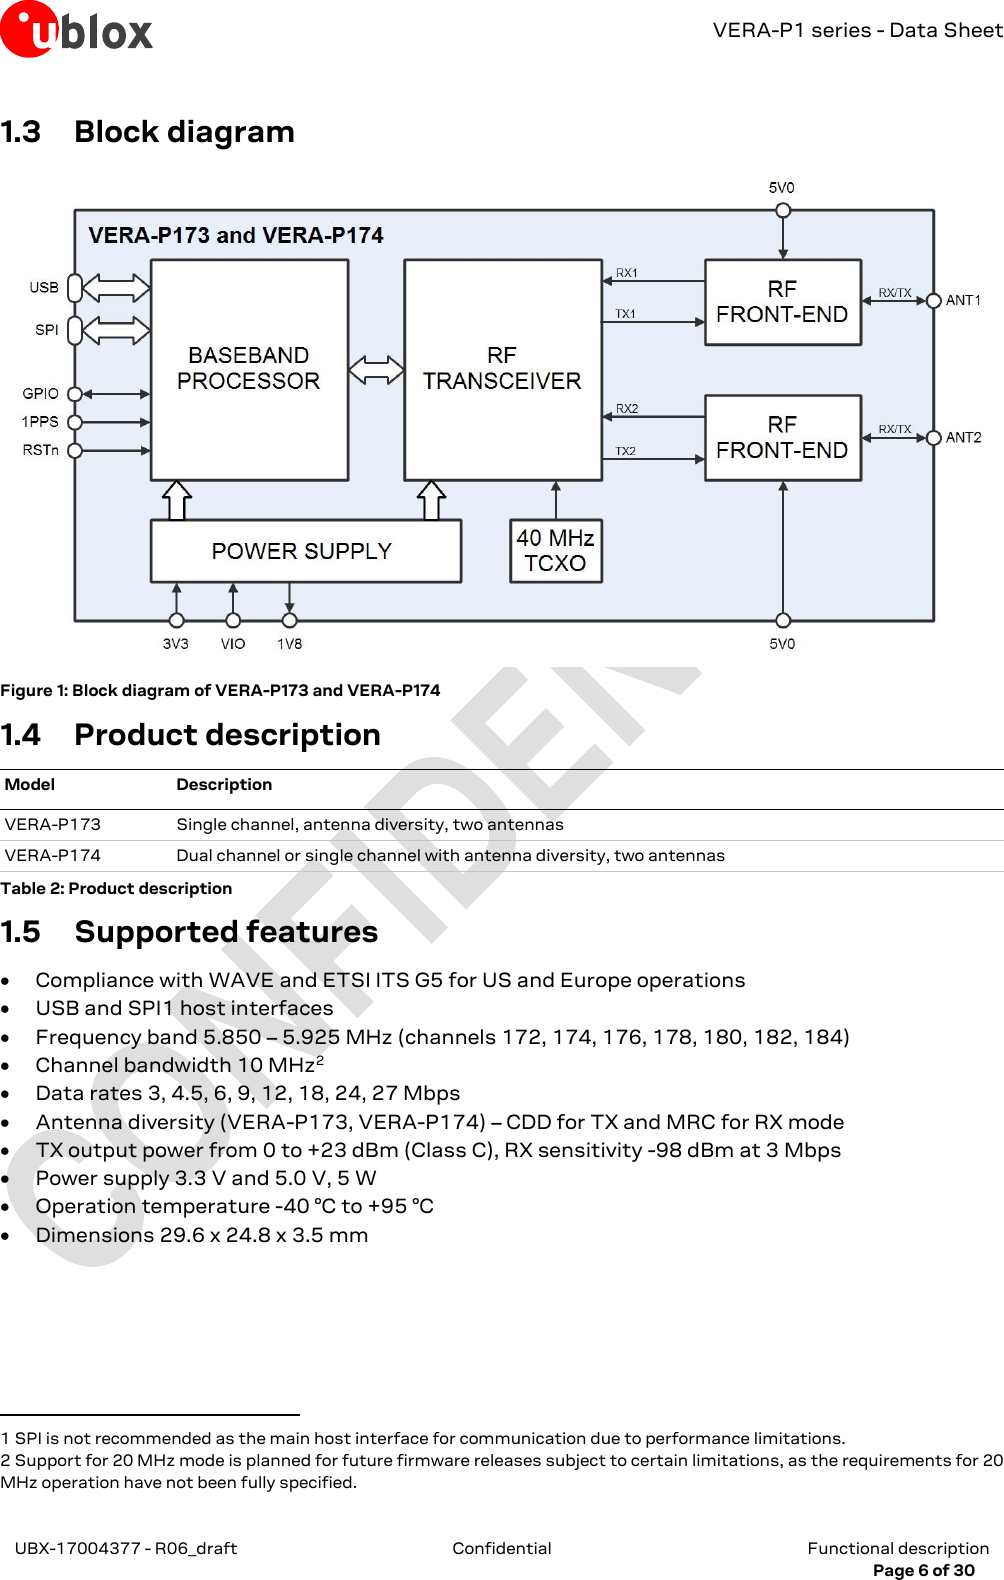 VERA-P1 series - Data Sheet UBX-17004377 - R06_draft Confidential  Functional description     Page 6 of 30 1.3 Block diagram  Figure 1: Block diagram of VERA-P173 and VERA-P174  1.4 Product description Model Description VERA-P173 Single channel, antenna diversity, two antennas VERA-P174 Dual channel or single channel with antenna diversity, two antennas Table 2: Product description 1.5 Supported features  Compliance with WAVE and ETSI ITS G5 for US and Europe operations  USB and SPI1 host interfaces  Frequency band 5.850 – 5.925 MHz (channels 172, 174, 176, 178, 180, 182, 184)  Channel bandwidth 10 MHz2  Data rates 3, 4.5, 6, 9, 12, 18, 24, 27 Mbps  Antenna diversity (VERA-P173, VERA-P174) – CDD for TX and MRC for RX mode  TX output power from 0 to +23 dBm (Class C), RX sensitivity -98 dBm at 3 Mbps  Power supply 3.3 V and 5.0 V, 5 W  Operation temperature -40 °C to +95 °C  Dimensions 29.6 x 24.8 x 3.5 mm                                                                     1 SPI is not recommended as the main host interface for communication due to performance limitations. 2 Support for 20 MHz mode is planned for future firmware releases subject to certain limitations, as the requirements for 20 MHz operation have not been fully specified. 